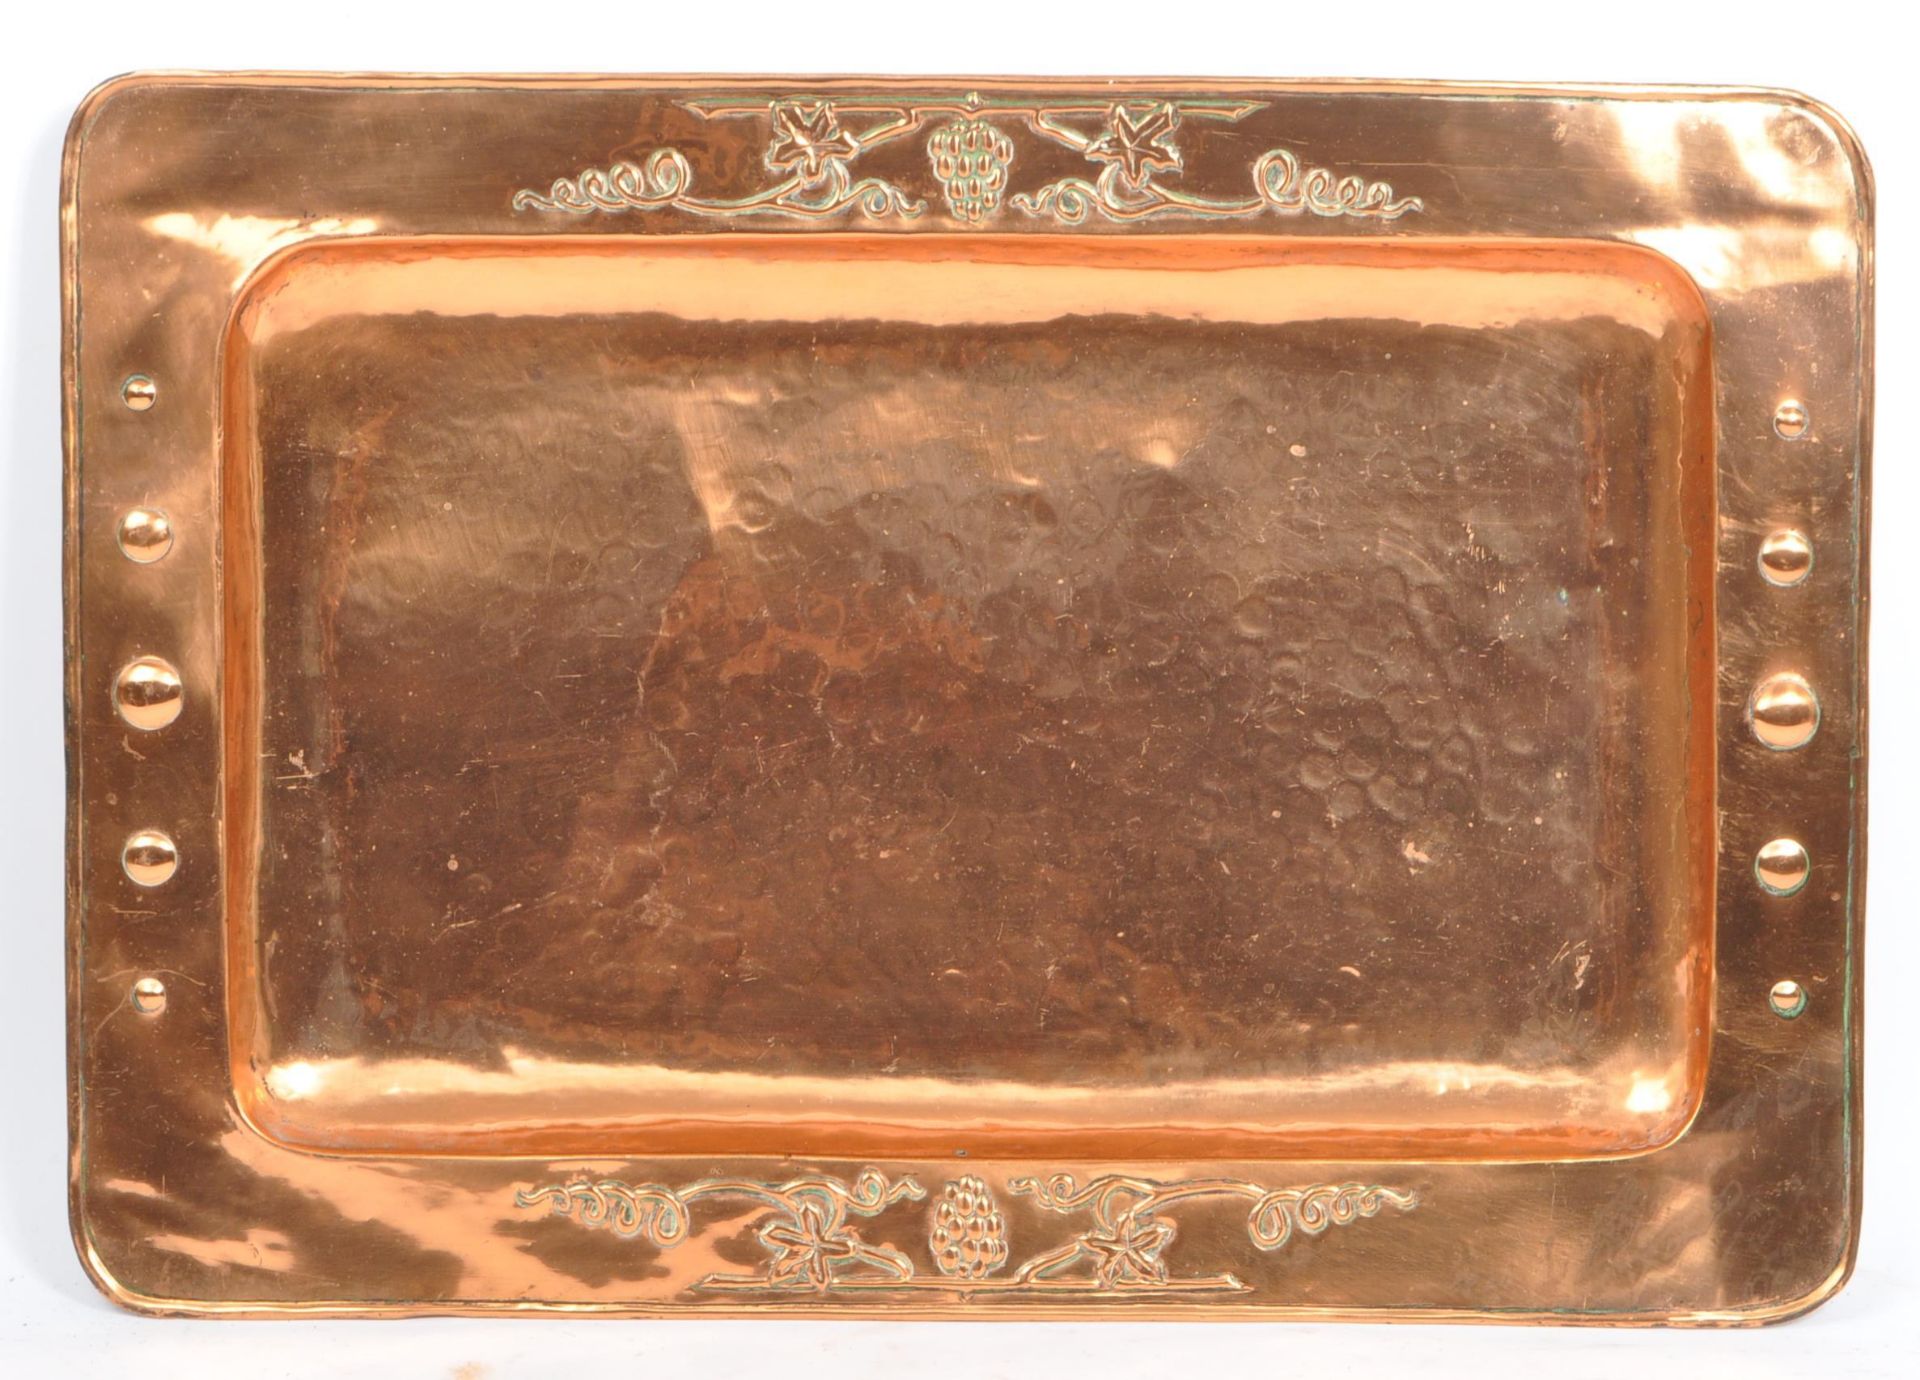 LATE 19TH CENTURY ARTS & CRAFTS HAMMERED COPPER TRAY